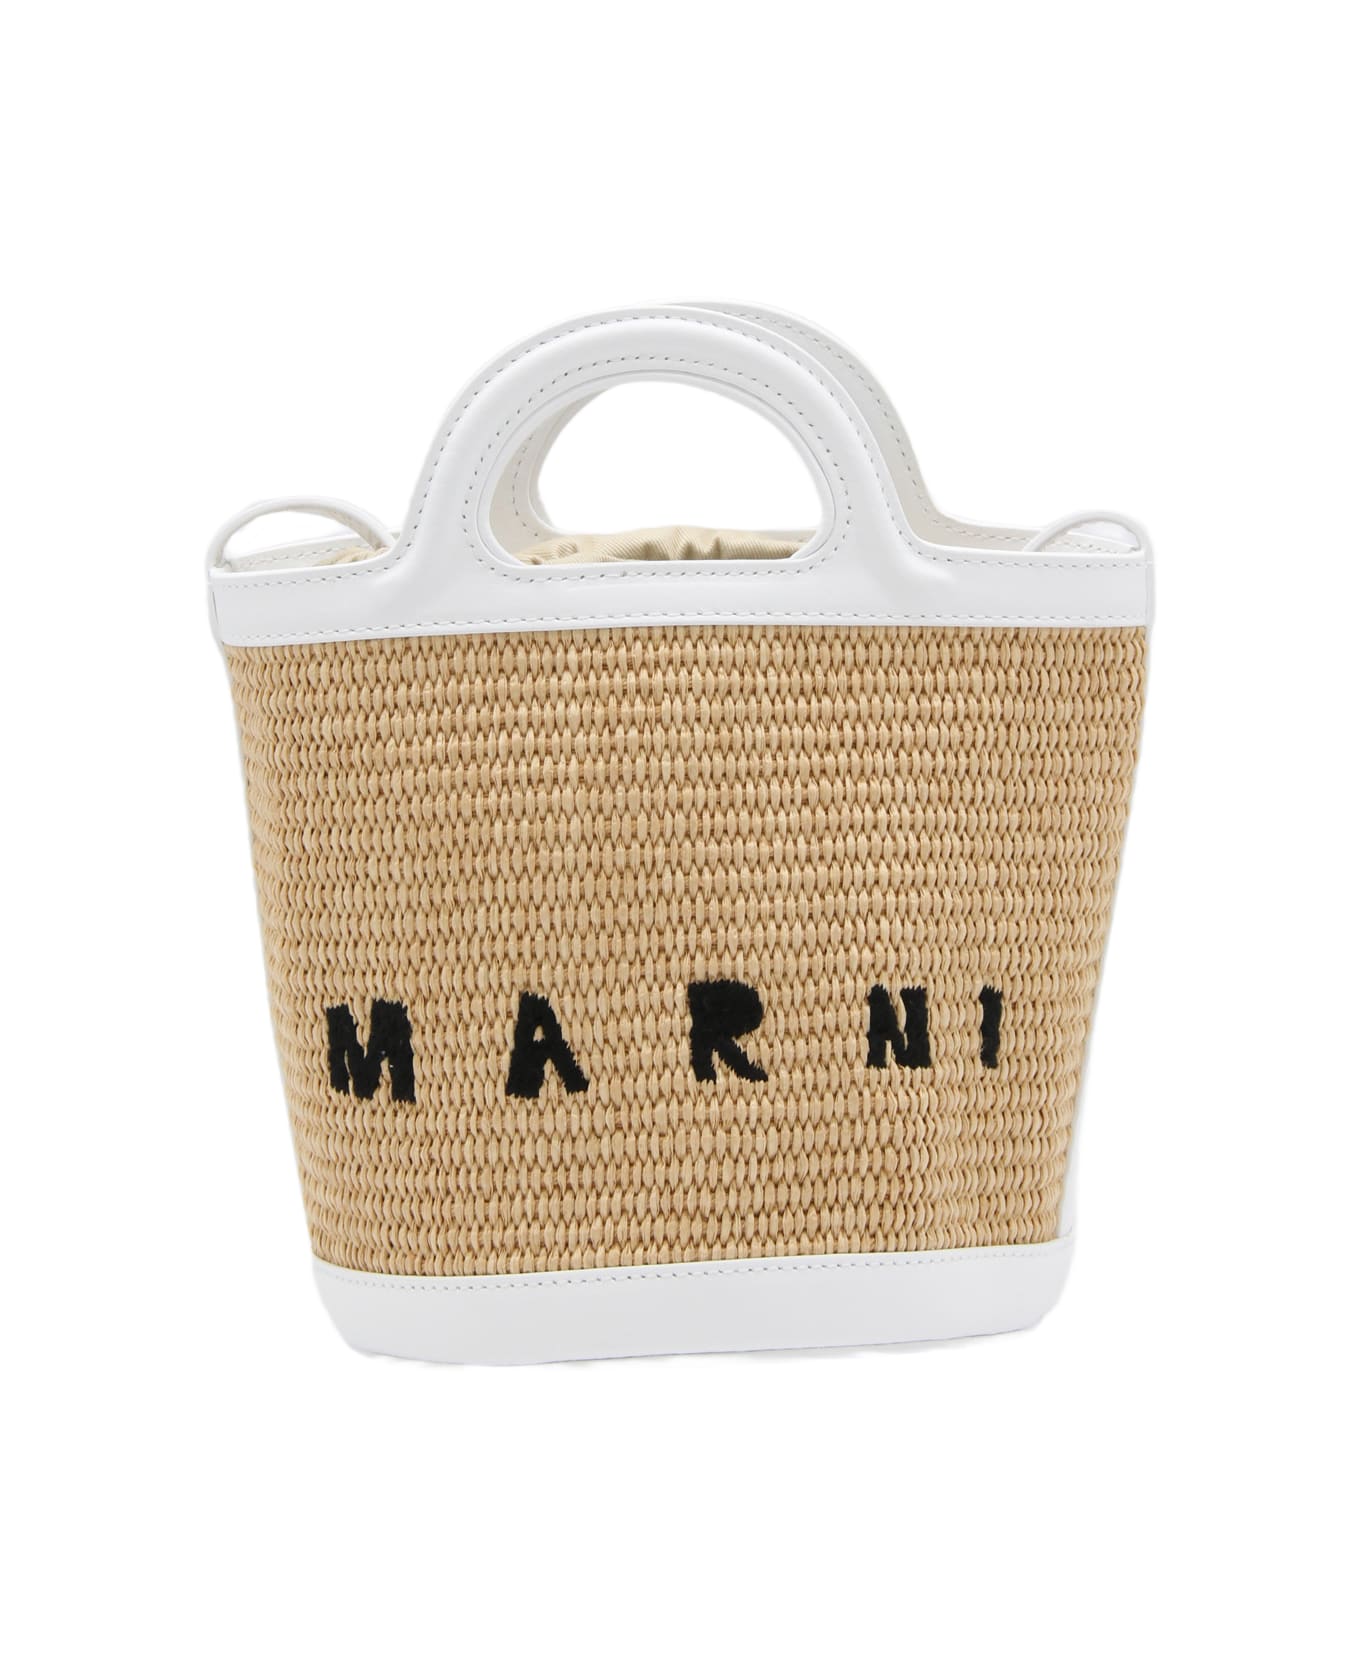 Marni White Leather And Beige Raffia Tropicalia Handle Bag - SAND STORM/LILLY WHITE トートバッグ